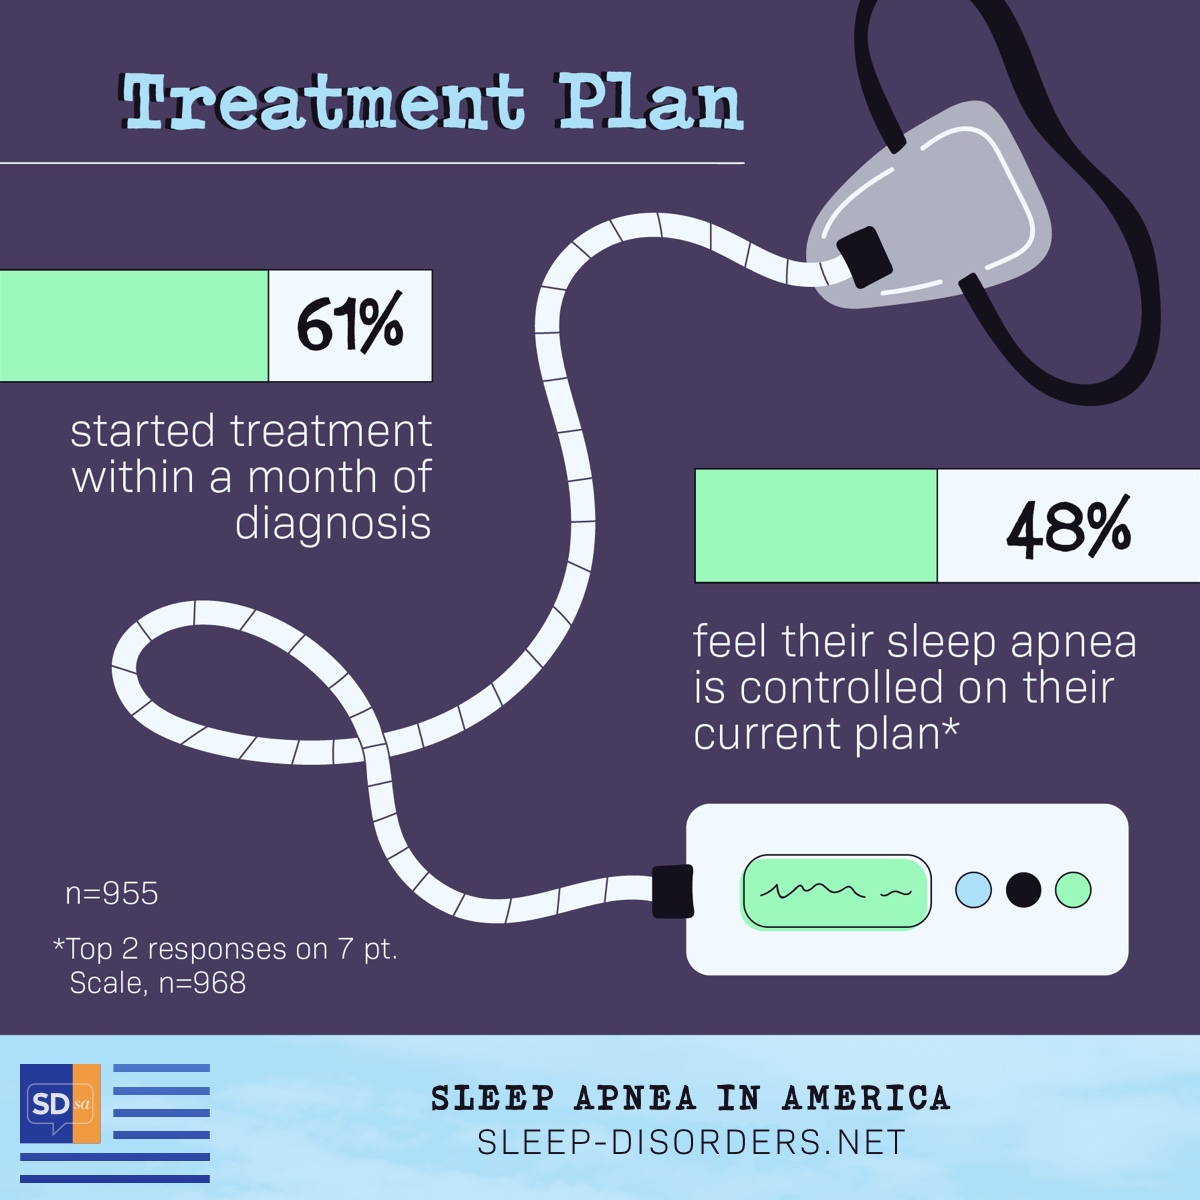 61% of participants started treatment within a month of diagnosis. 48% feel their sleep apnea is controlled on their current plan.